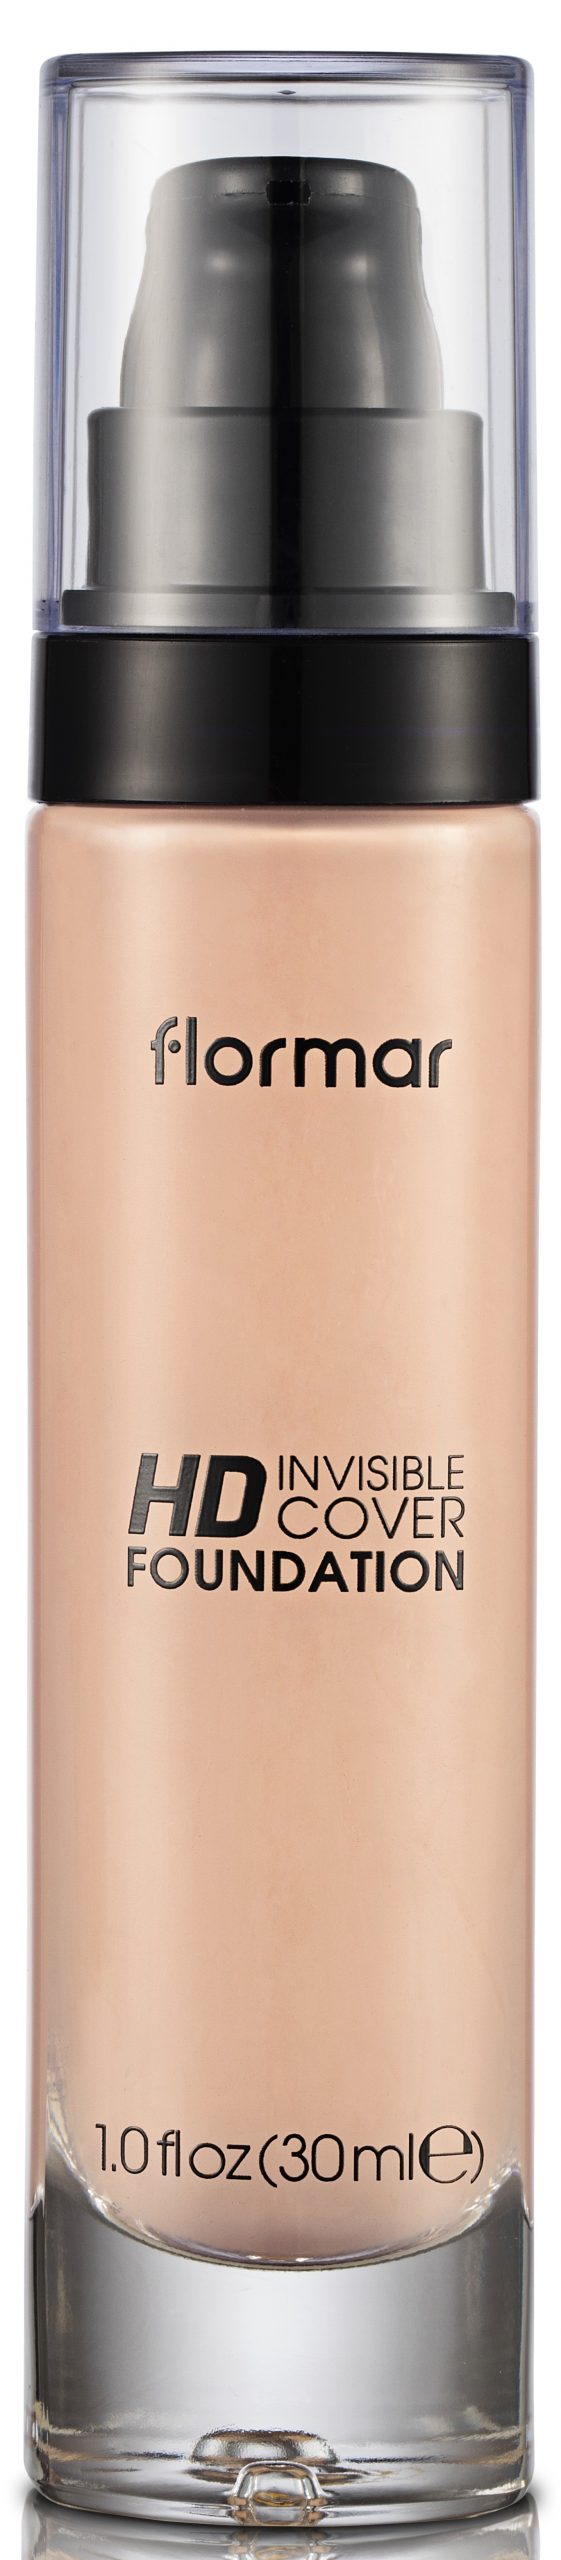 Flormar Invisible Cover HD Foundation